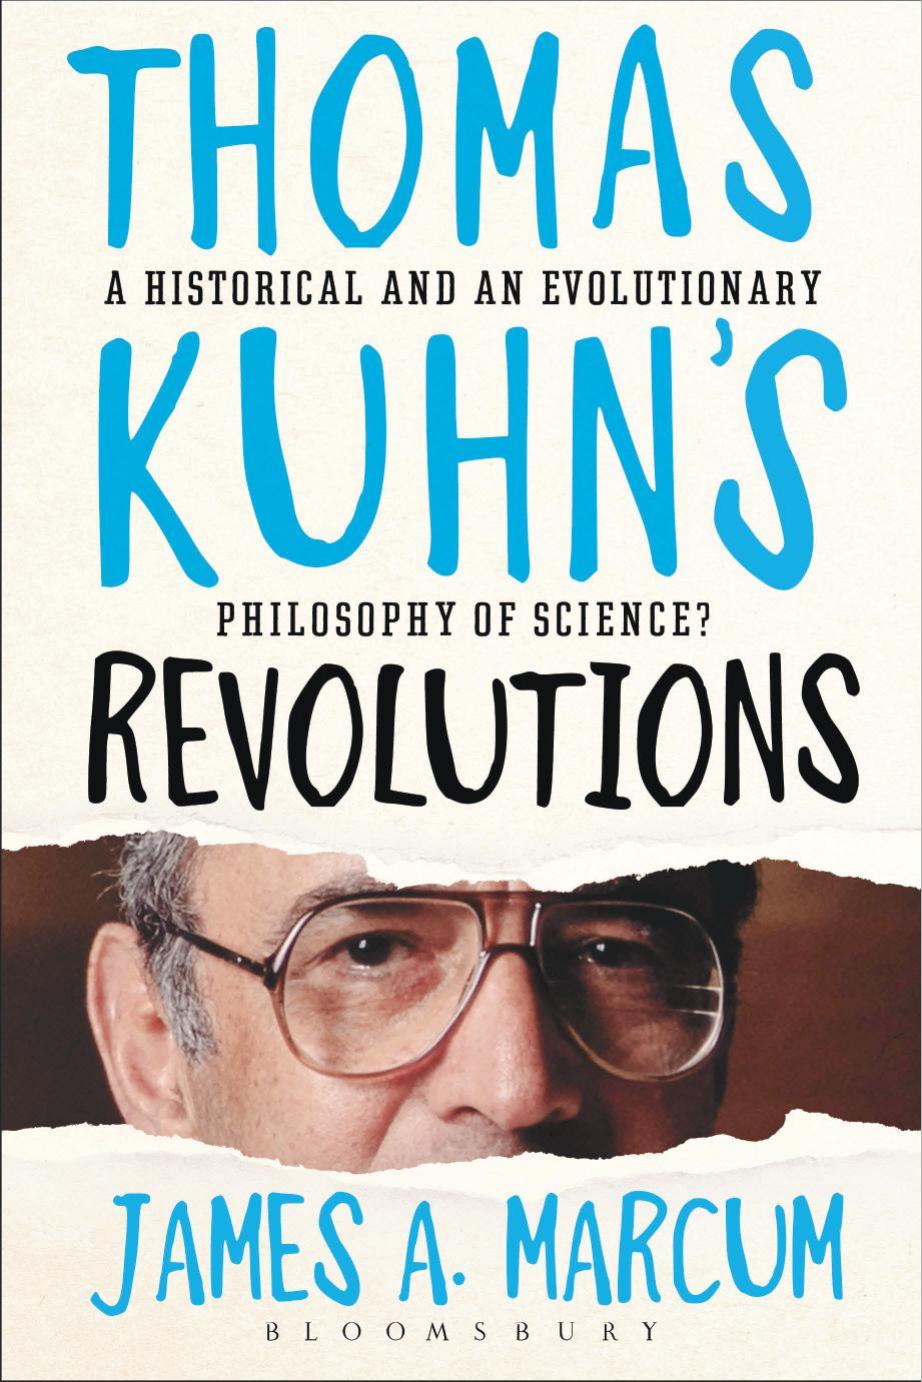 Thomas Kuhn's Revolutions: A Historical and an Evolutionary Philosophy of Science?